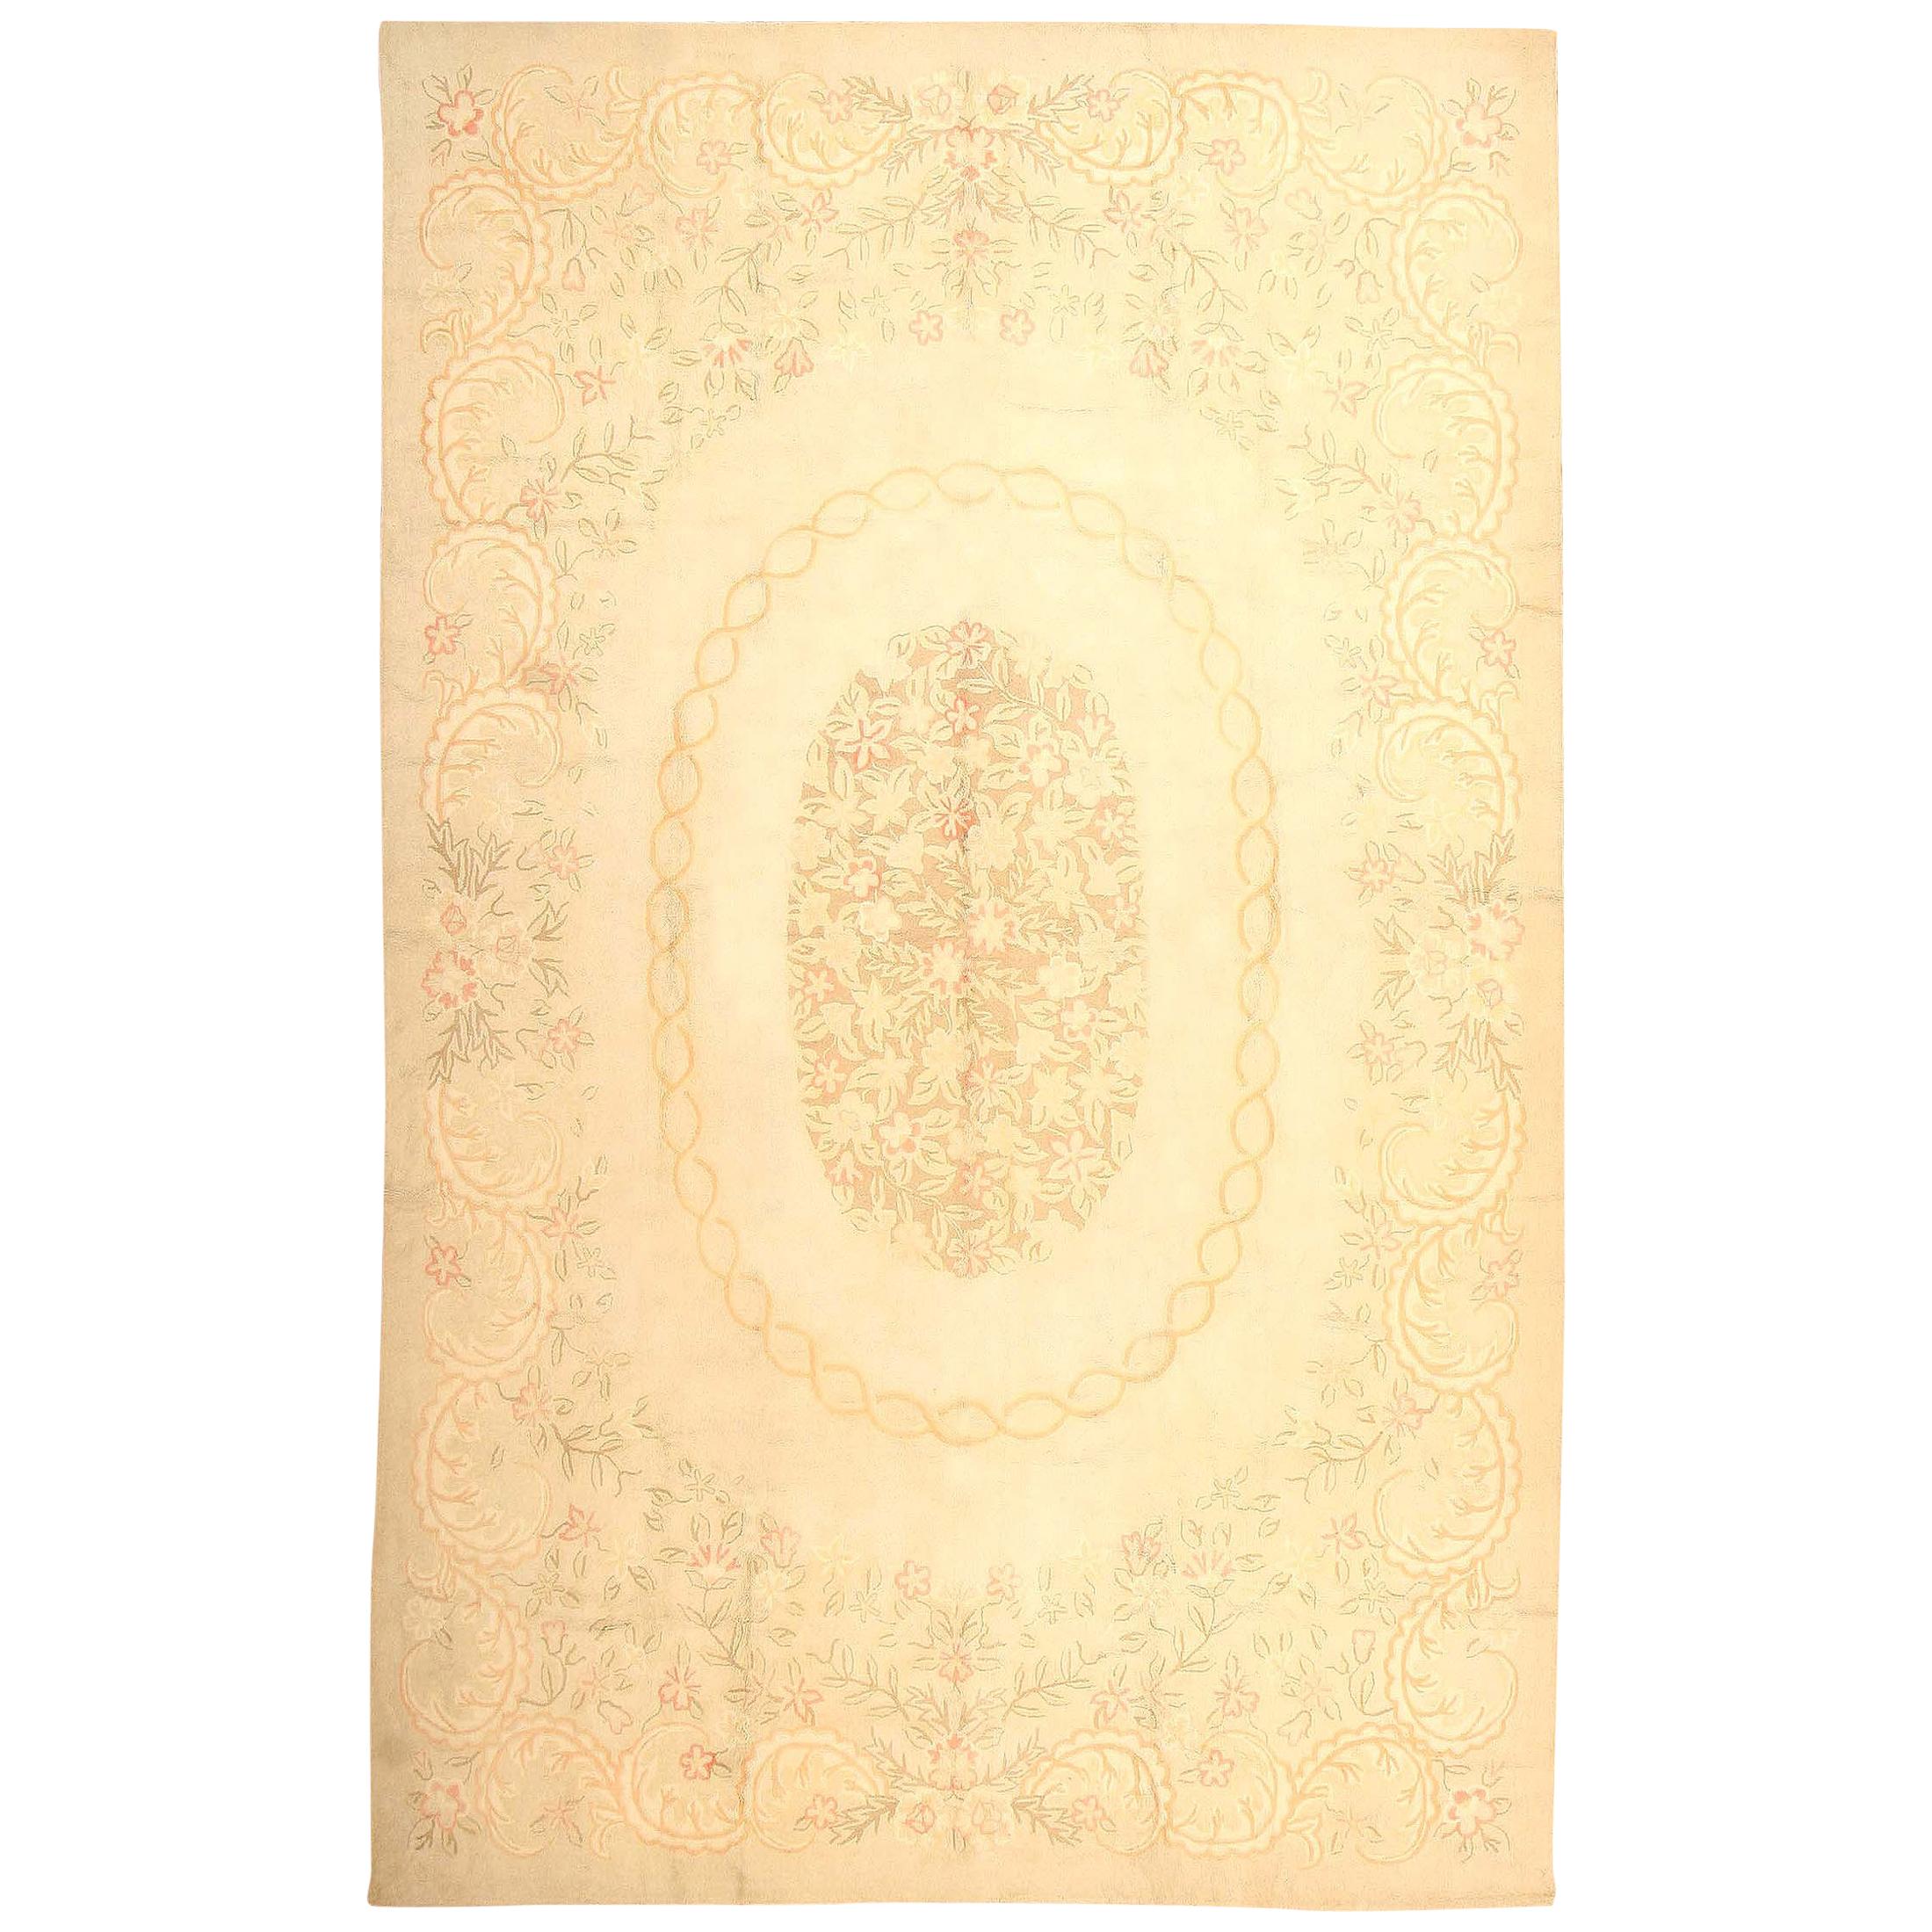 Large Antique American Hooked Rug. Size: 11 ft 4 in x 18 ft 2 in  